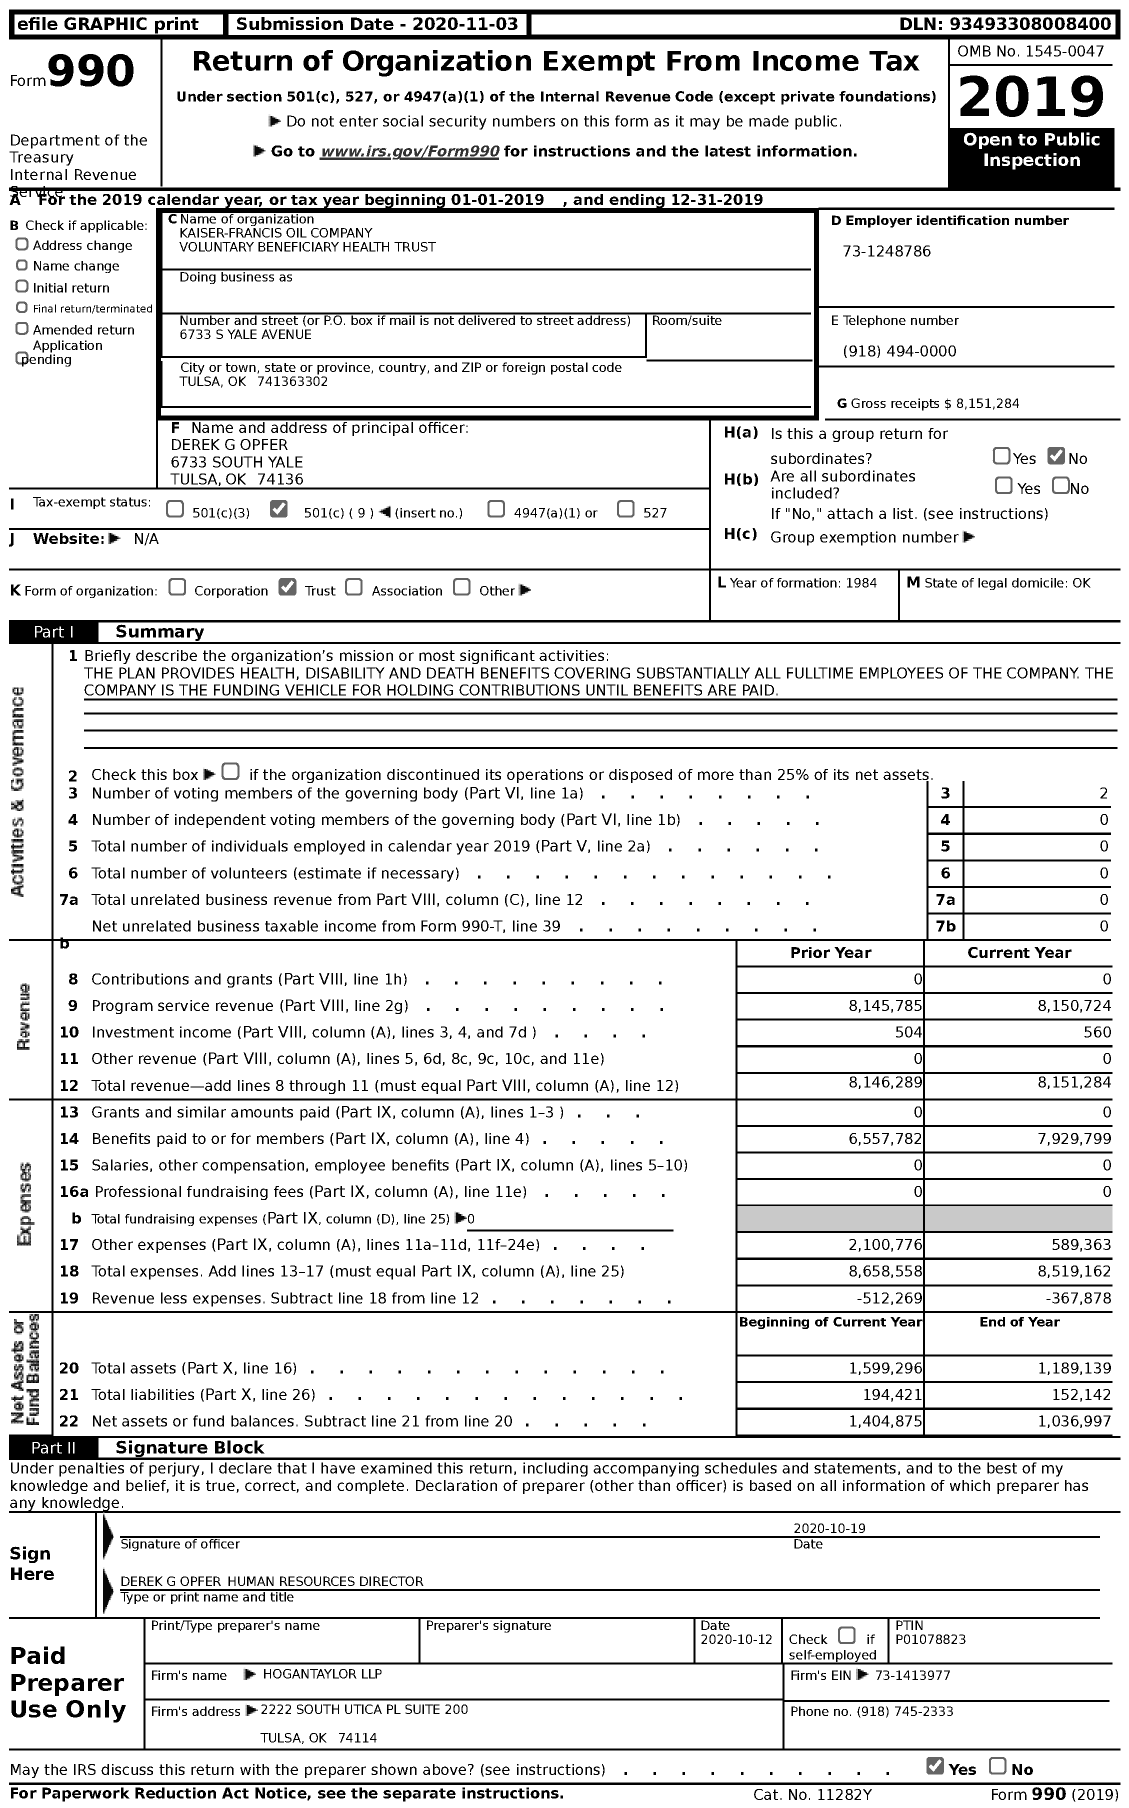 Image of first page of 2019 Form 990 for Kaiser-Francis Oil Company Voluntary Beneficiary Health Trust